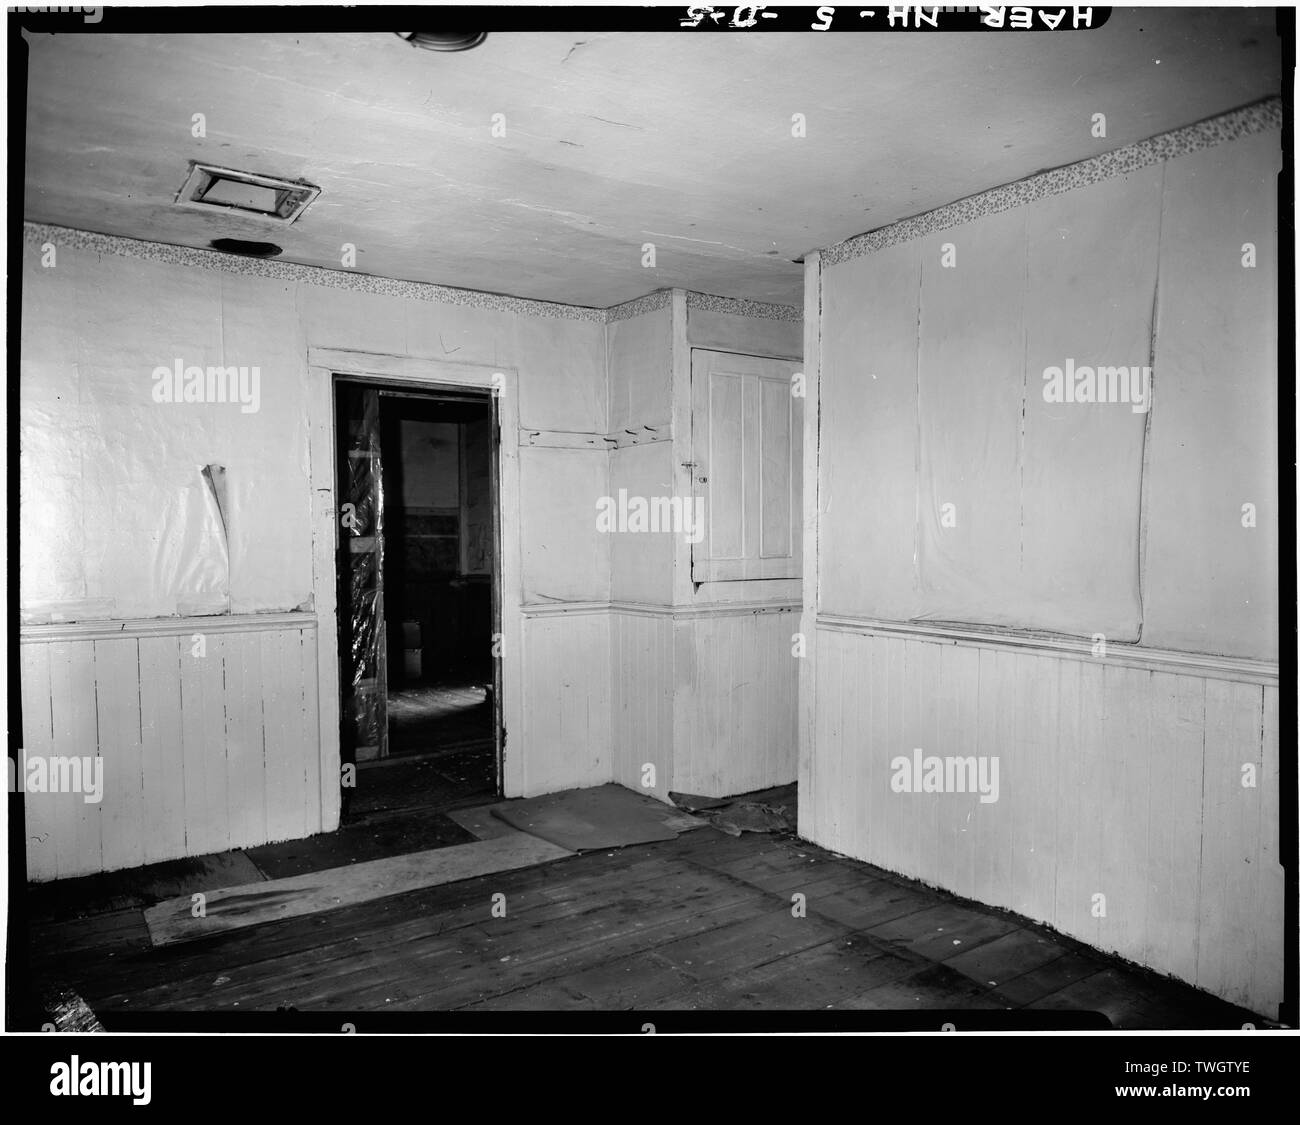 ROOM INTERIOR. - River Street Historic District, 36 River Street (House), Claremont, Sullivan County, NH Stock Photo